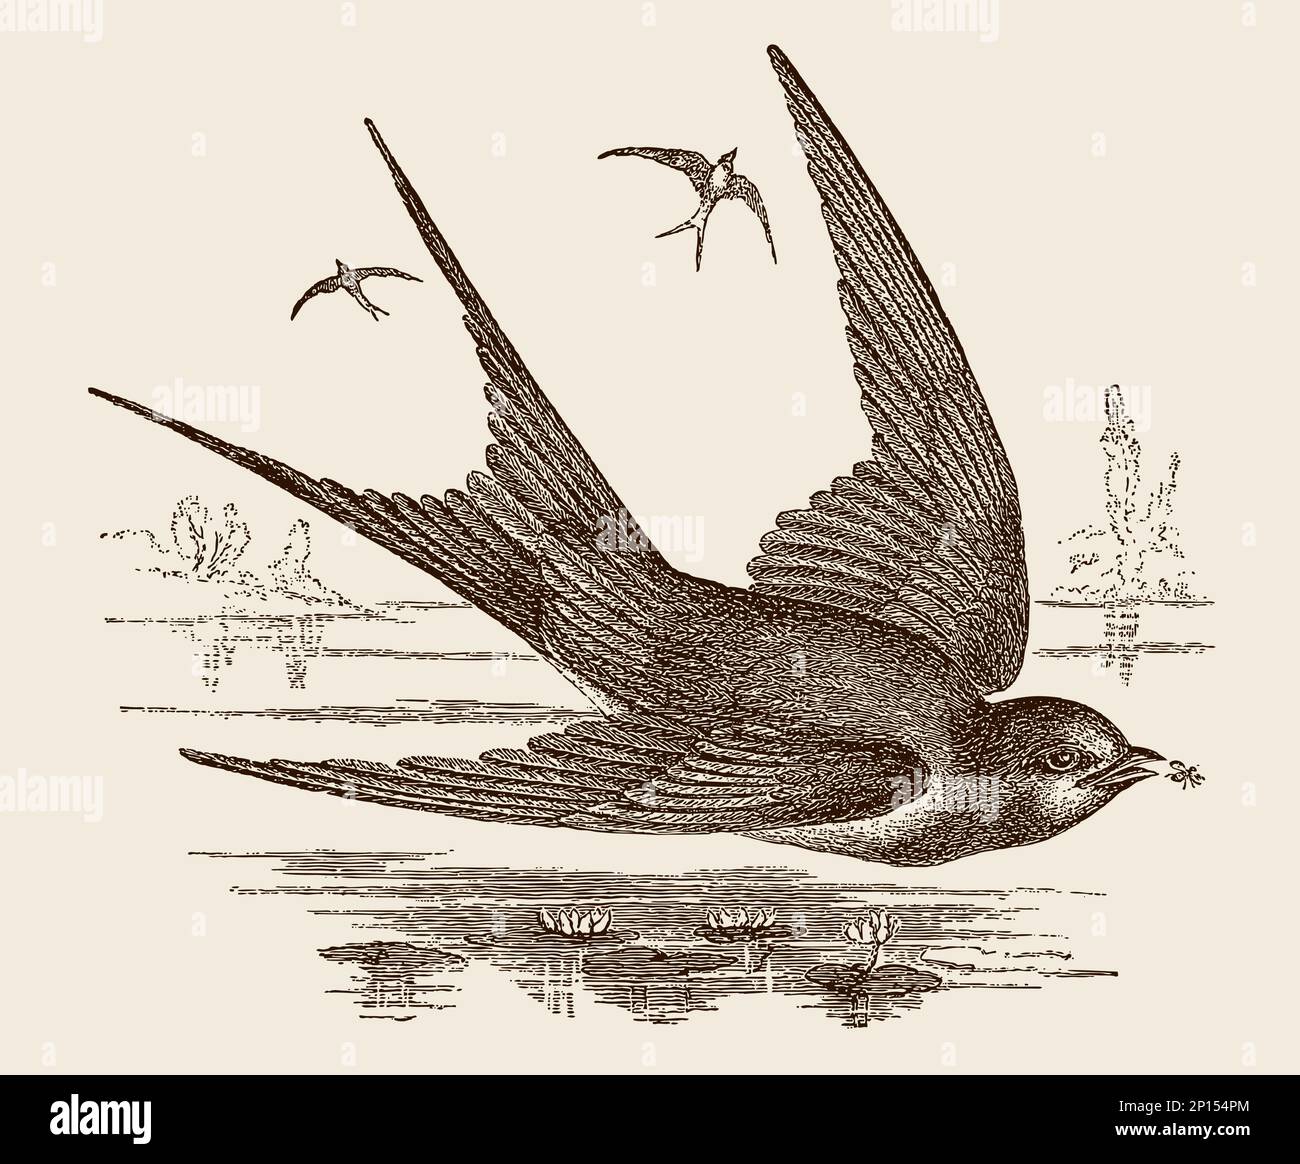 Flying swallow catching insect, after antique wood engraving Stock Vector